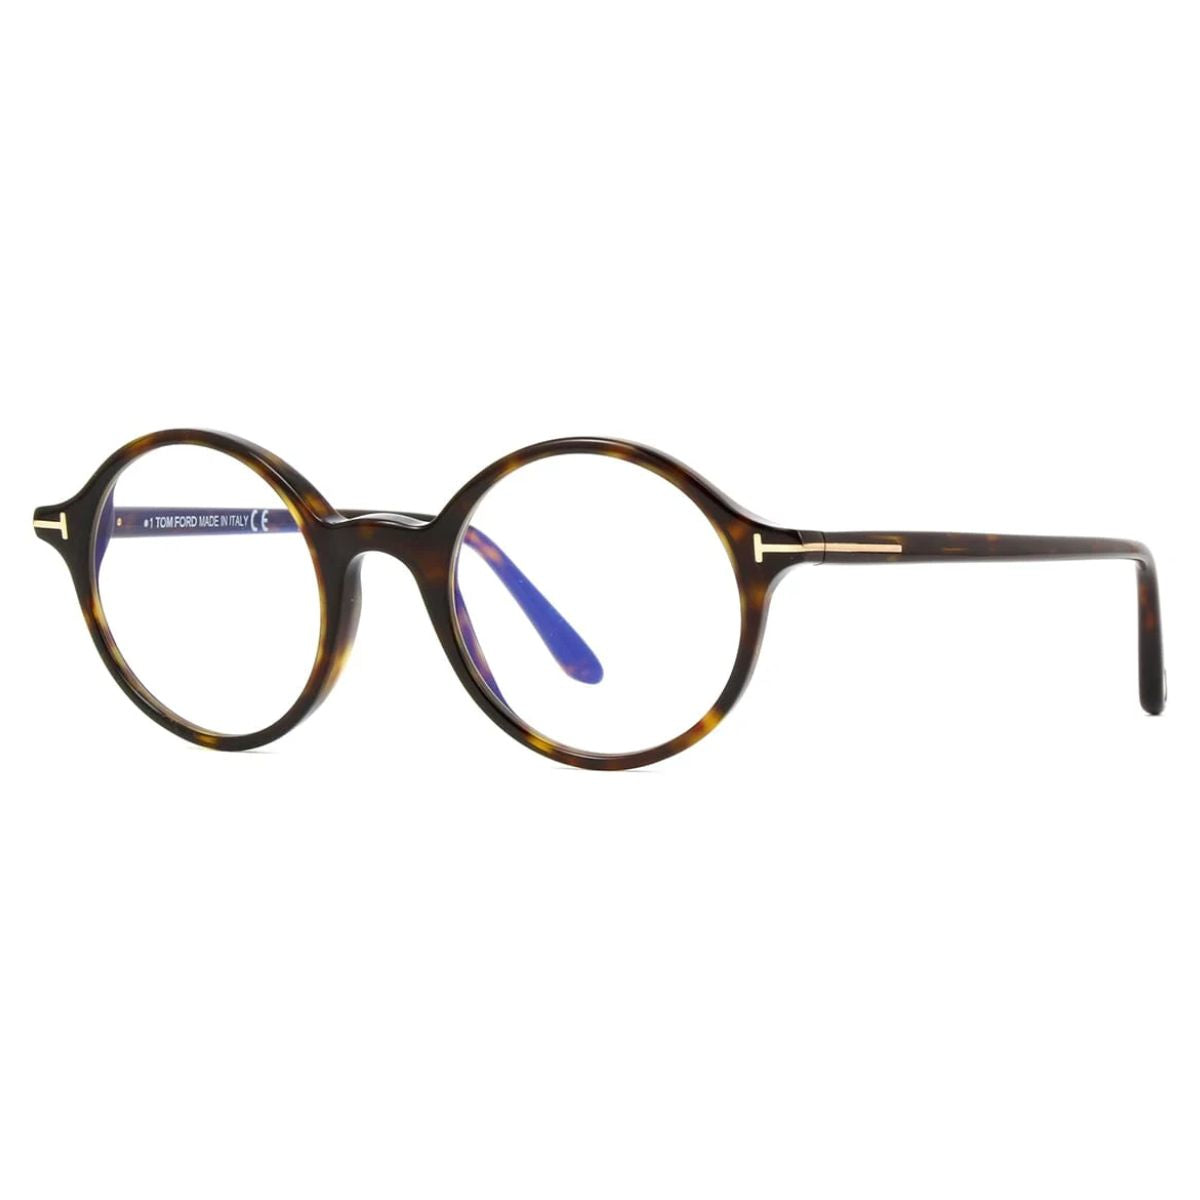 "Tom Ford Rounded Anti Reflection Eyeglasses For Men's At Optorium"